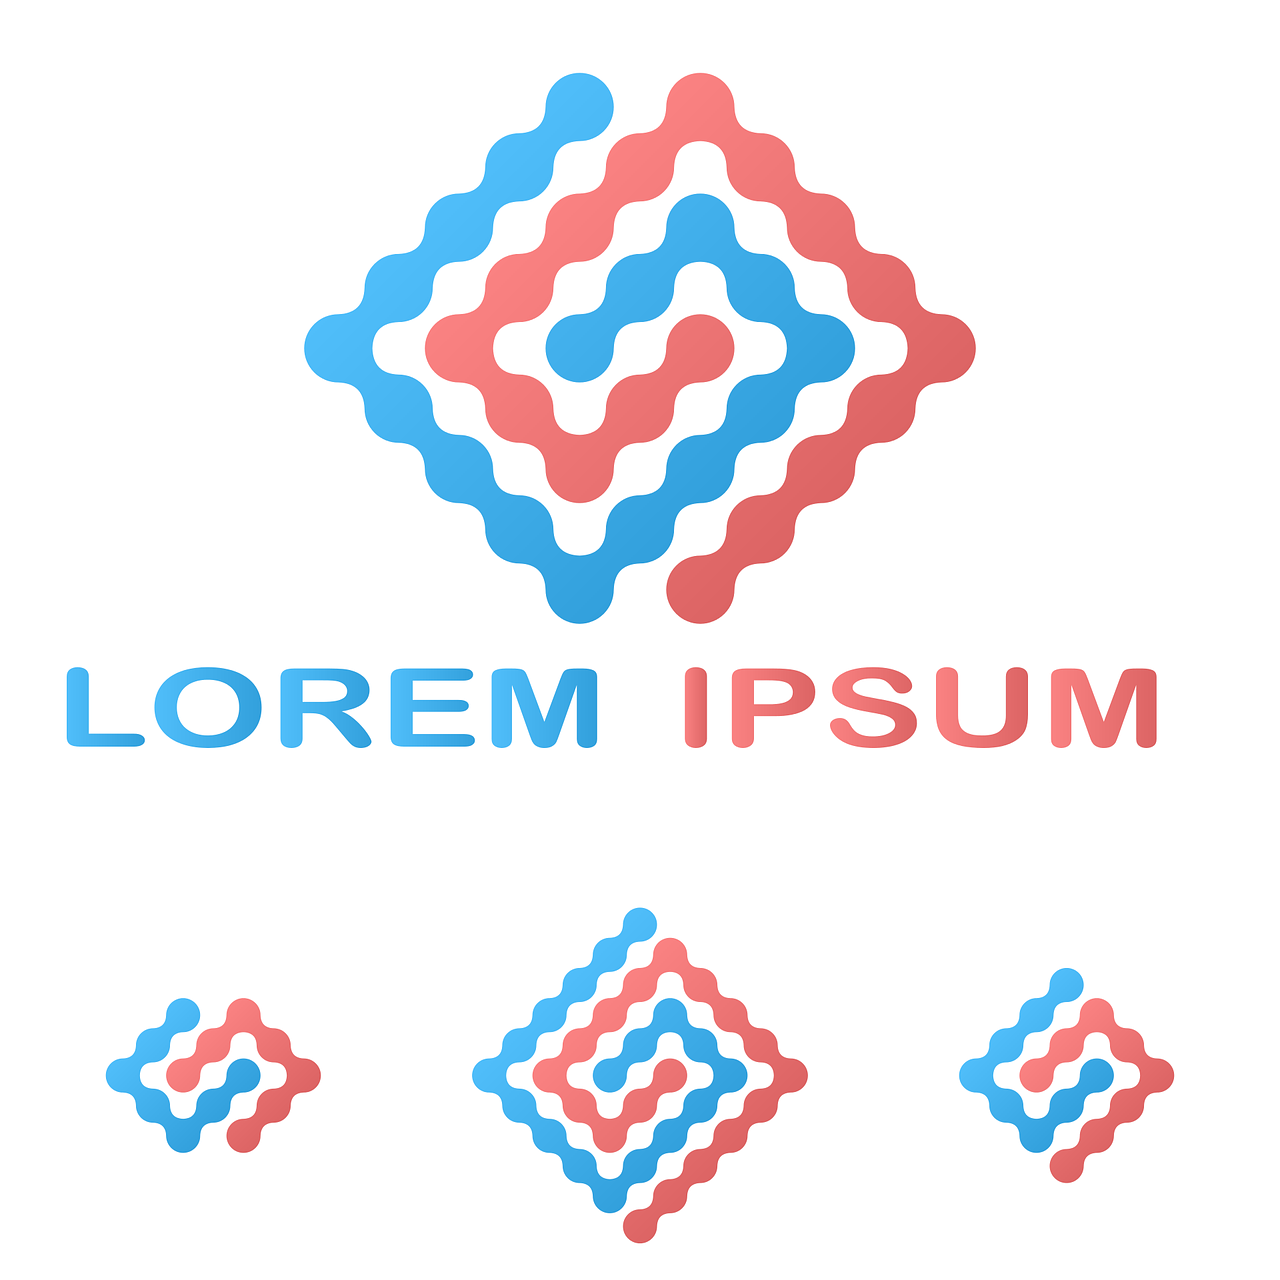 a blue and red logo on a white background, a digital rendering, abstract illusionism, flat icon, lorem ipsum dolor sit amet, serpentine twisty maze, various posed